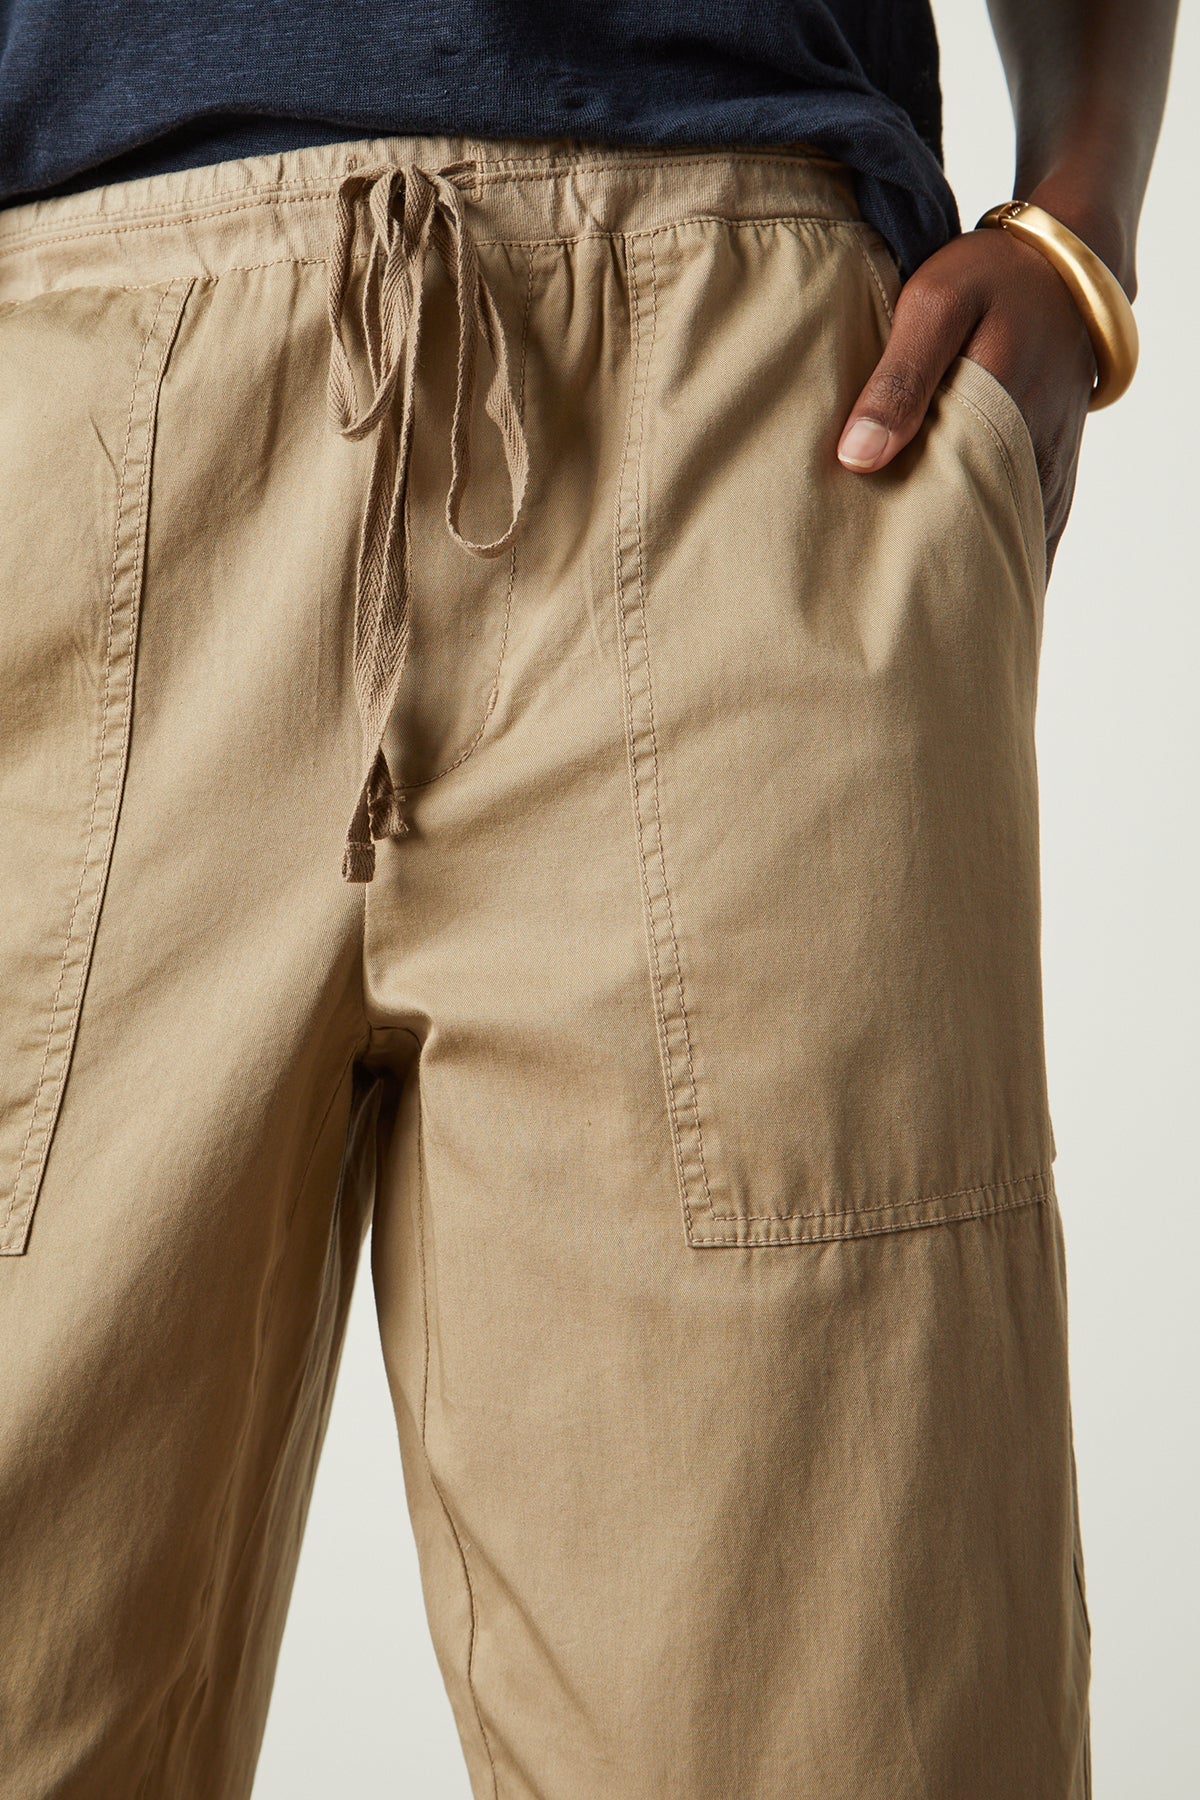   Misty Pant in oak twill front close up detail 